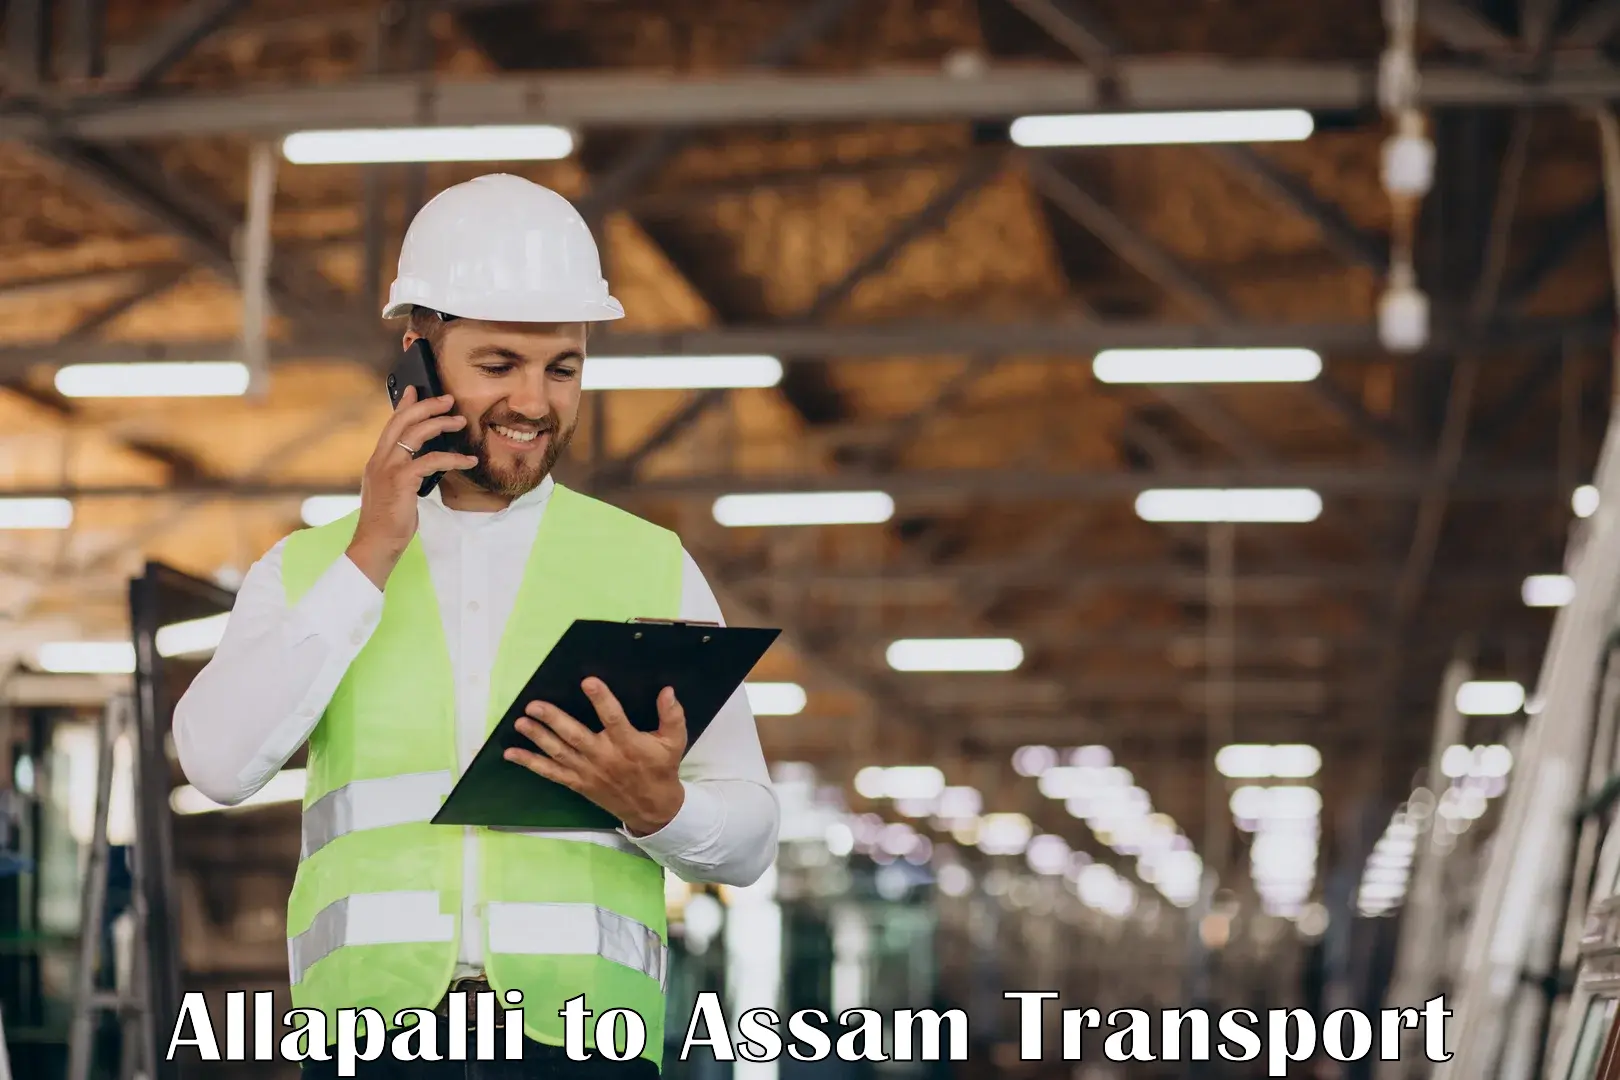 Truck transport companies in India Allapalli to Lala Assam